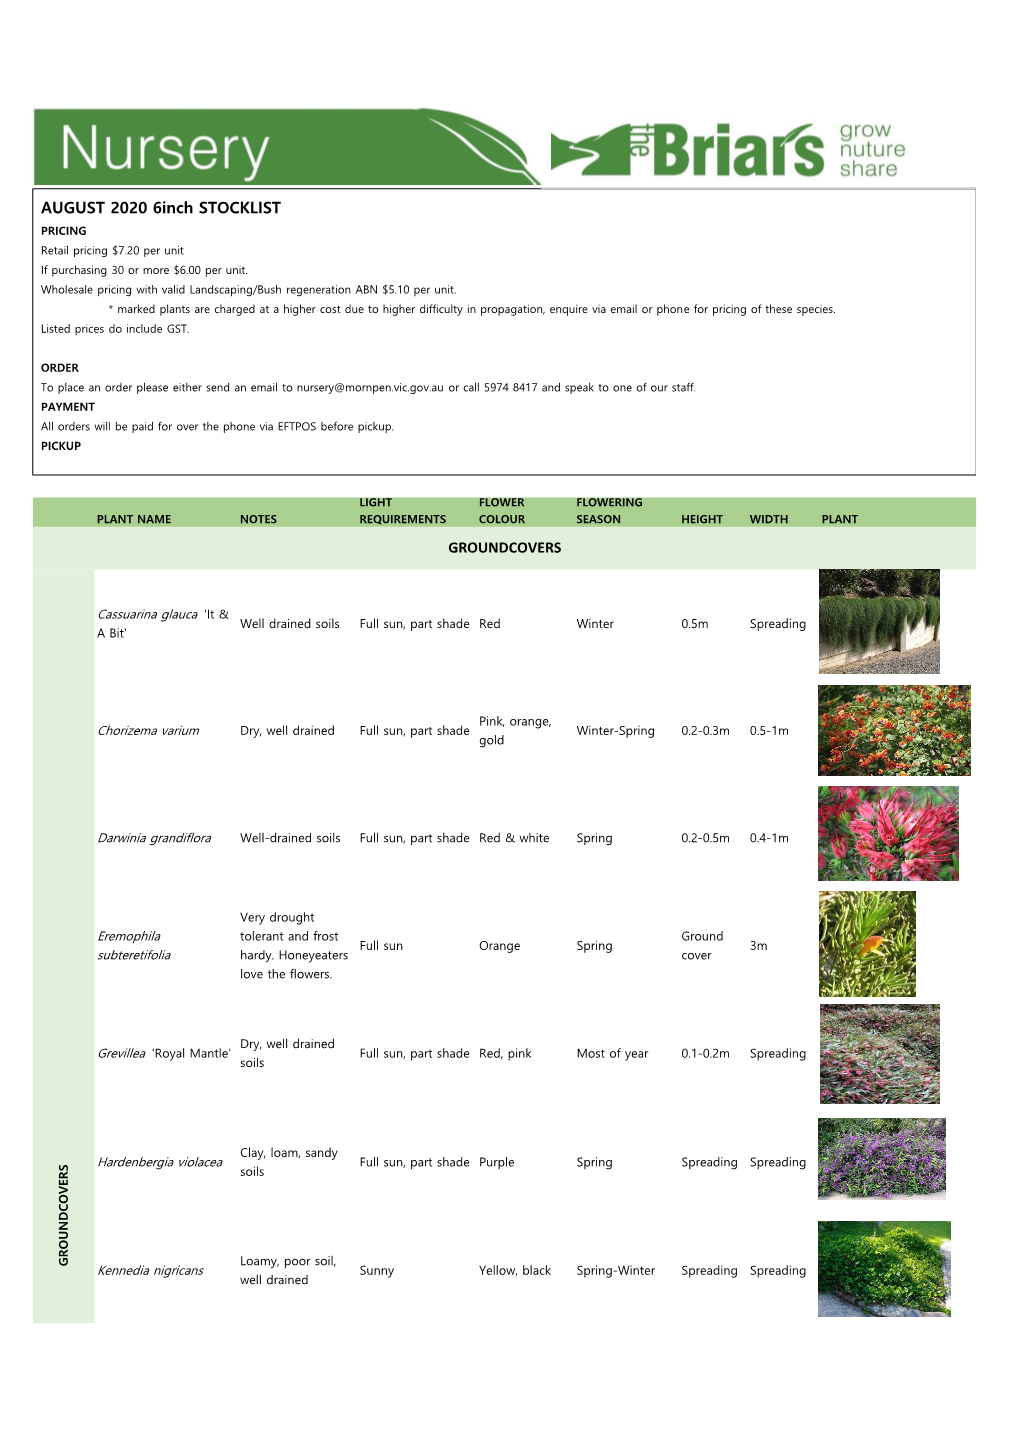 GROUNDCOVERS AUGUST 2020 6Inch STOCKLIST